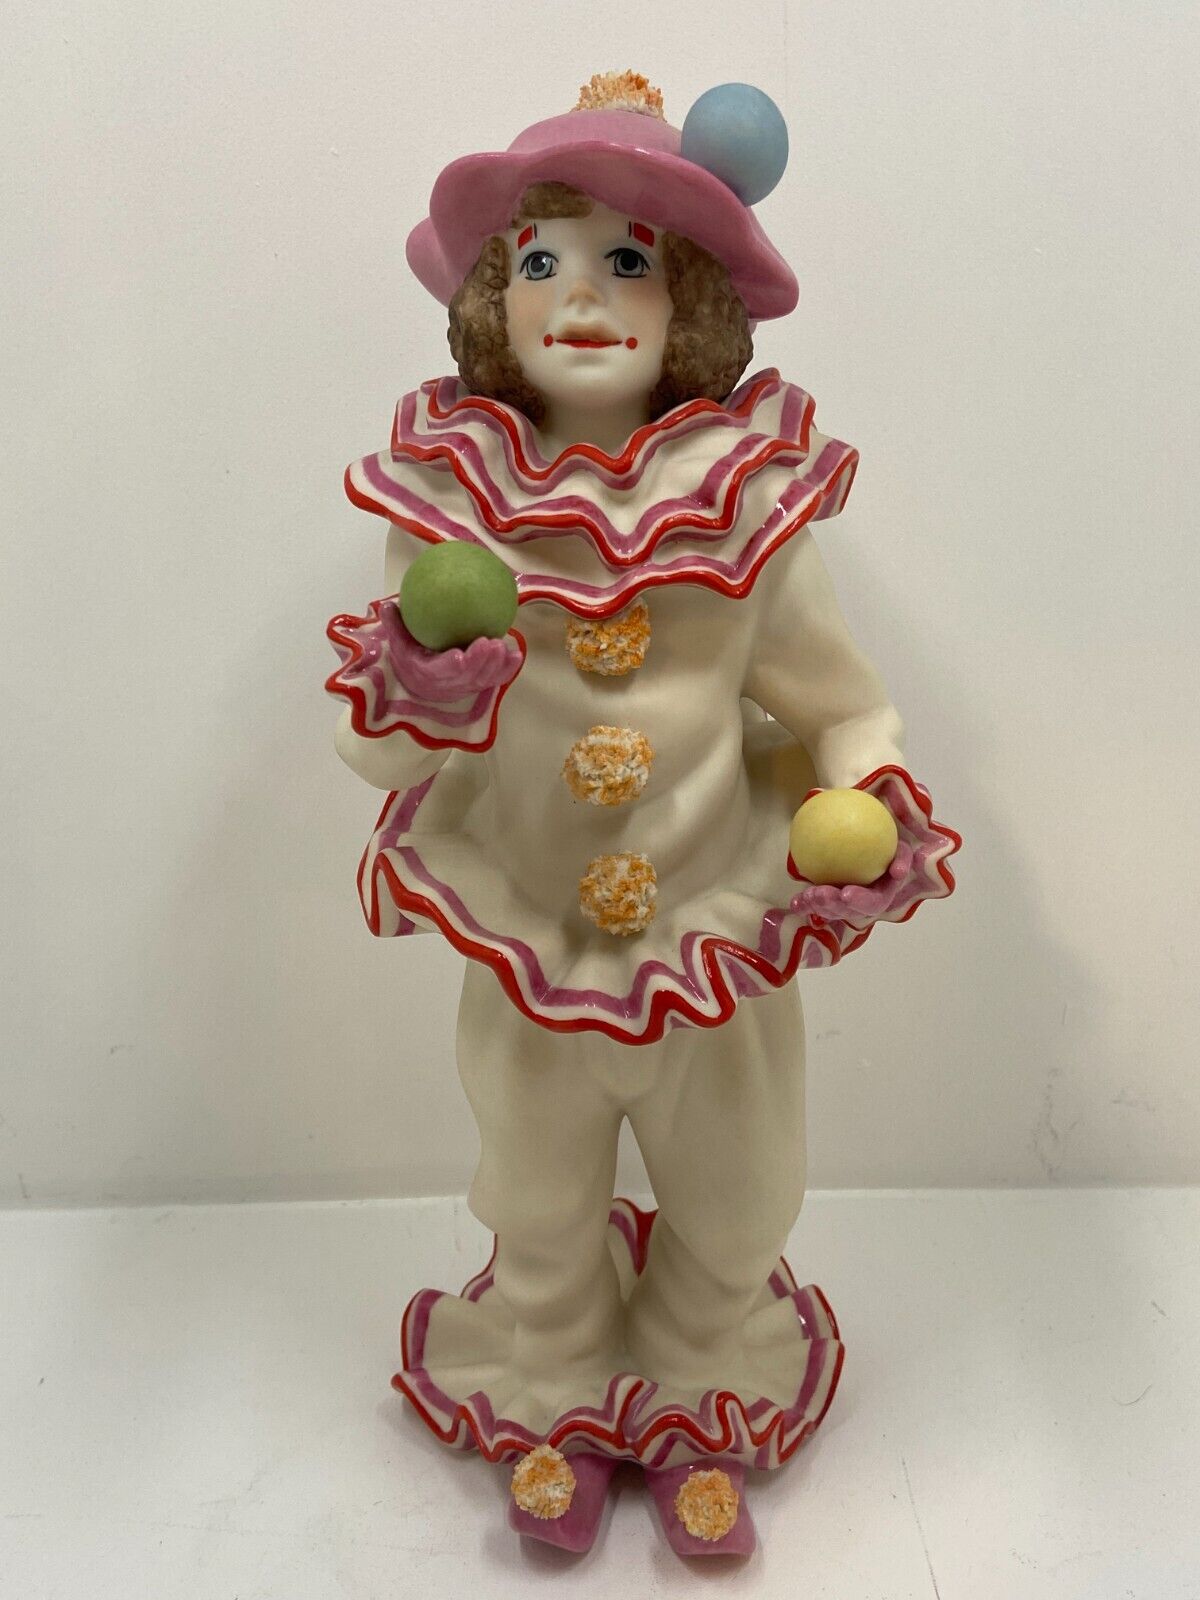 Cybis Porcelain Frollo the Juggler Clown Limited Edition #280